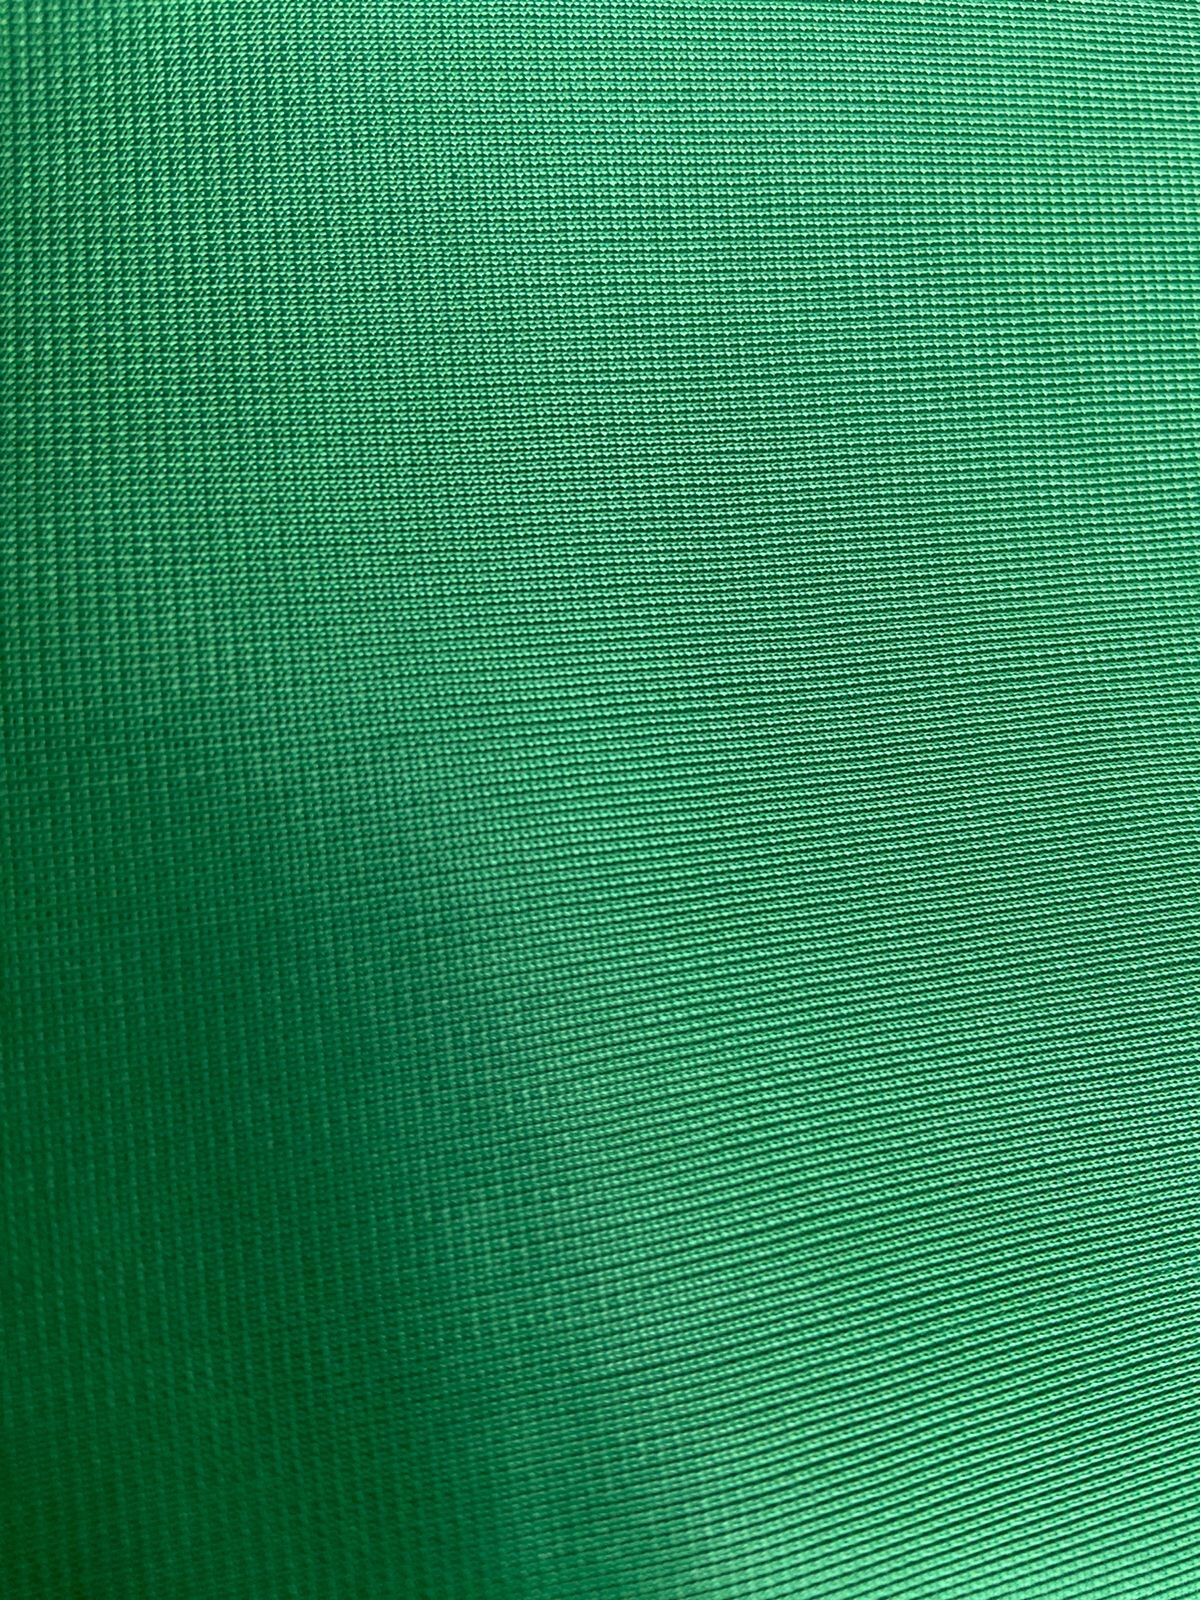 60 Super Poly Fabric 220 gsm 3mtr